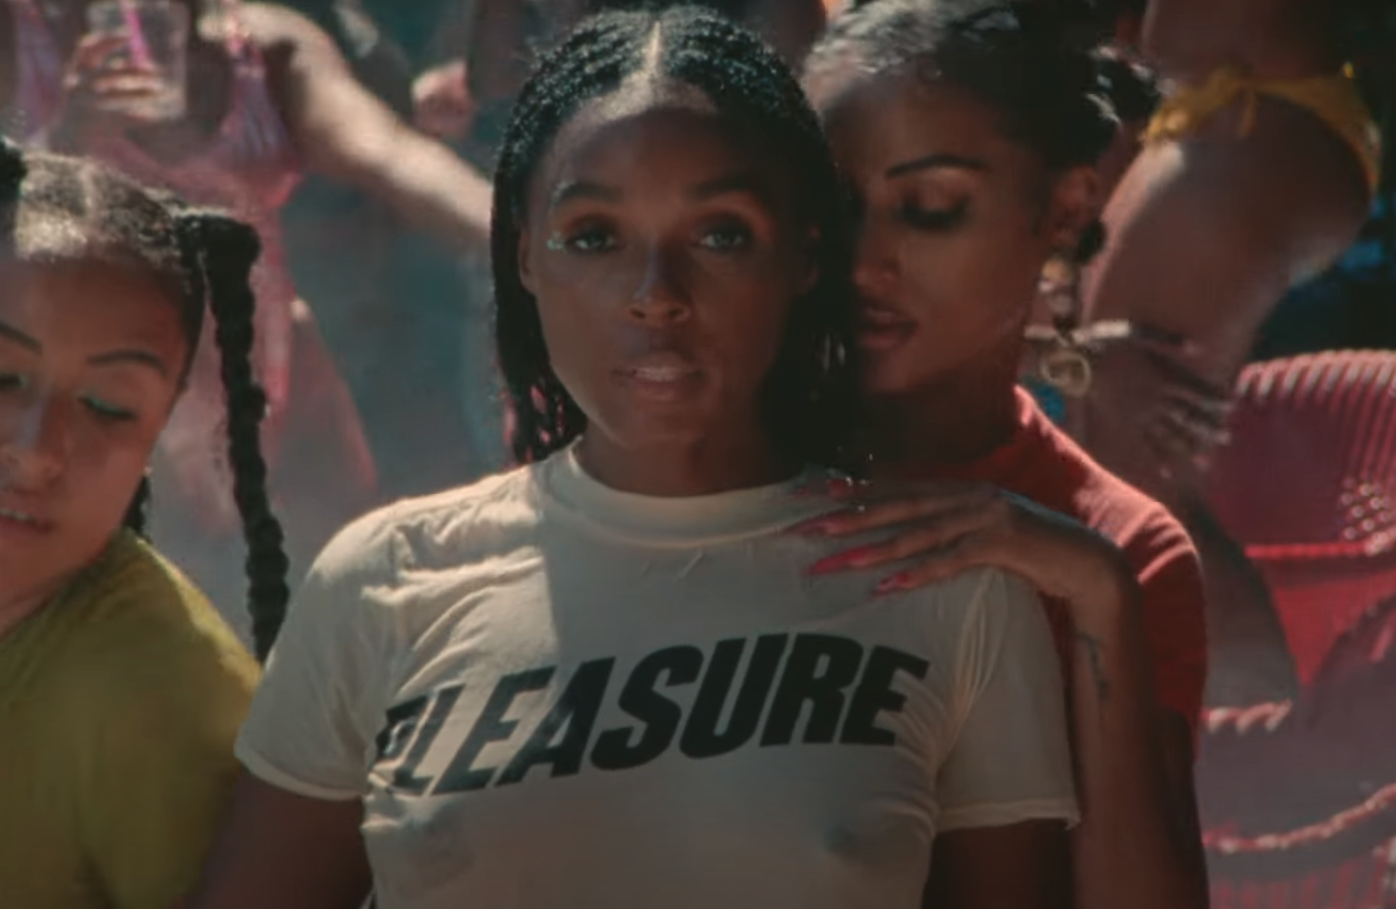 Janelle wearing a wet shirt that says Pleasure